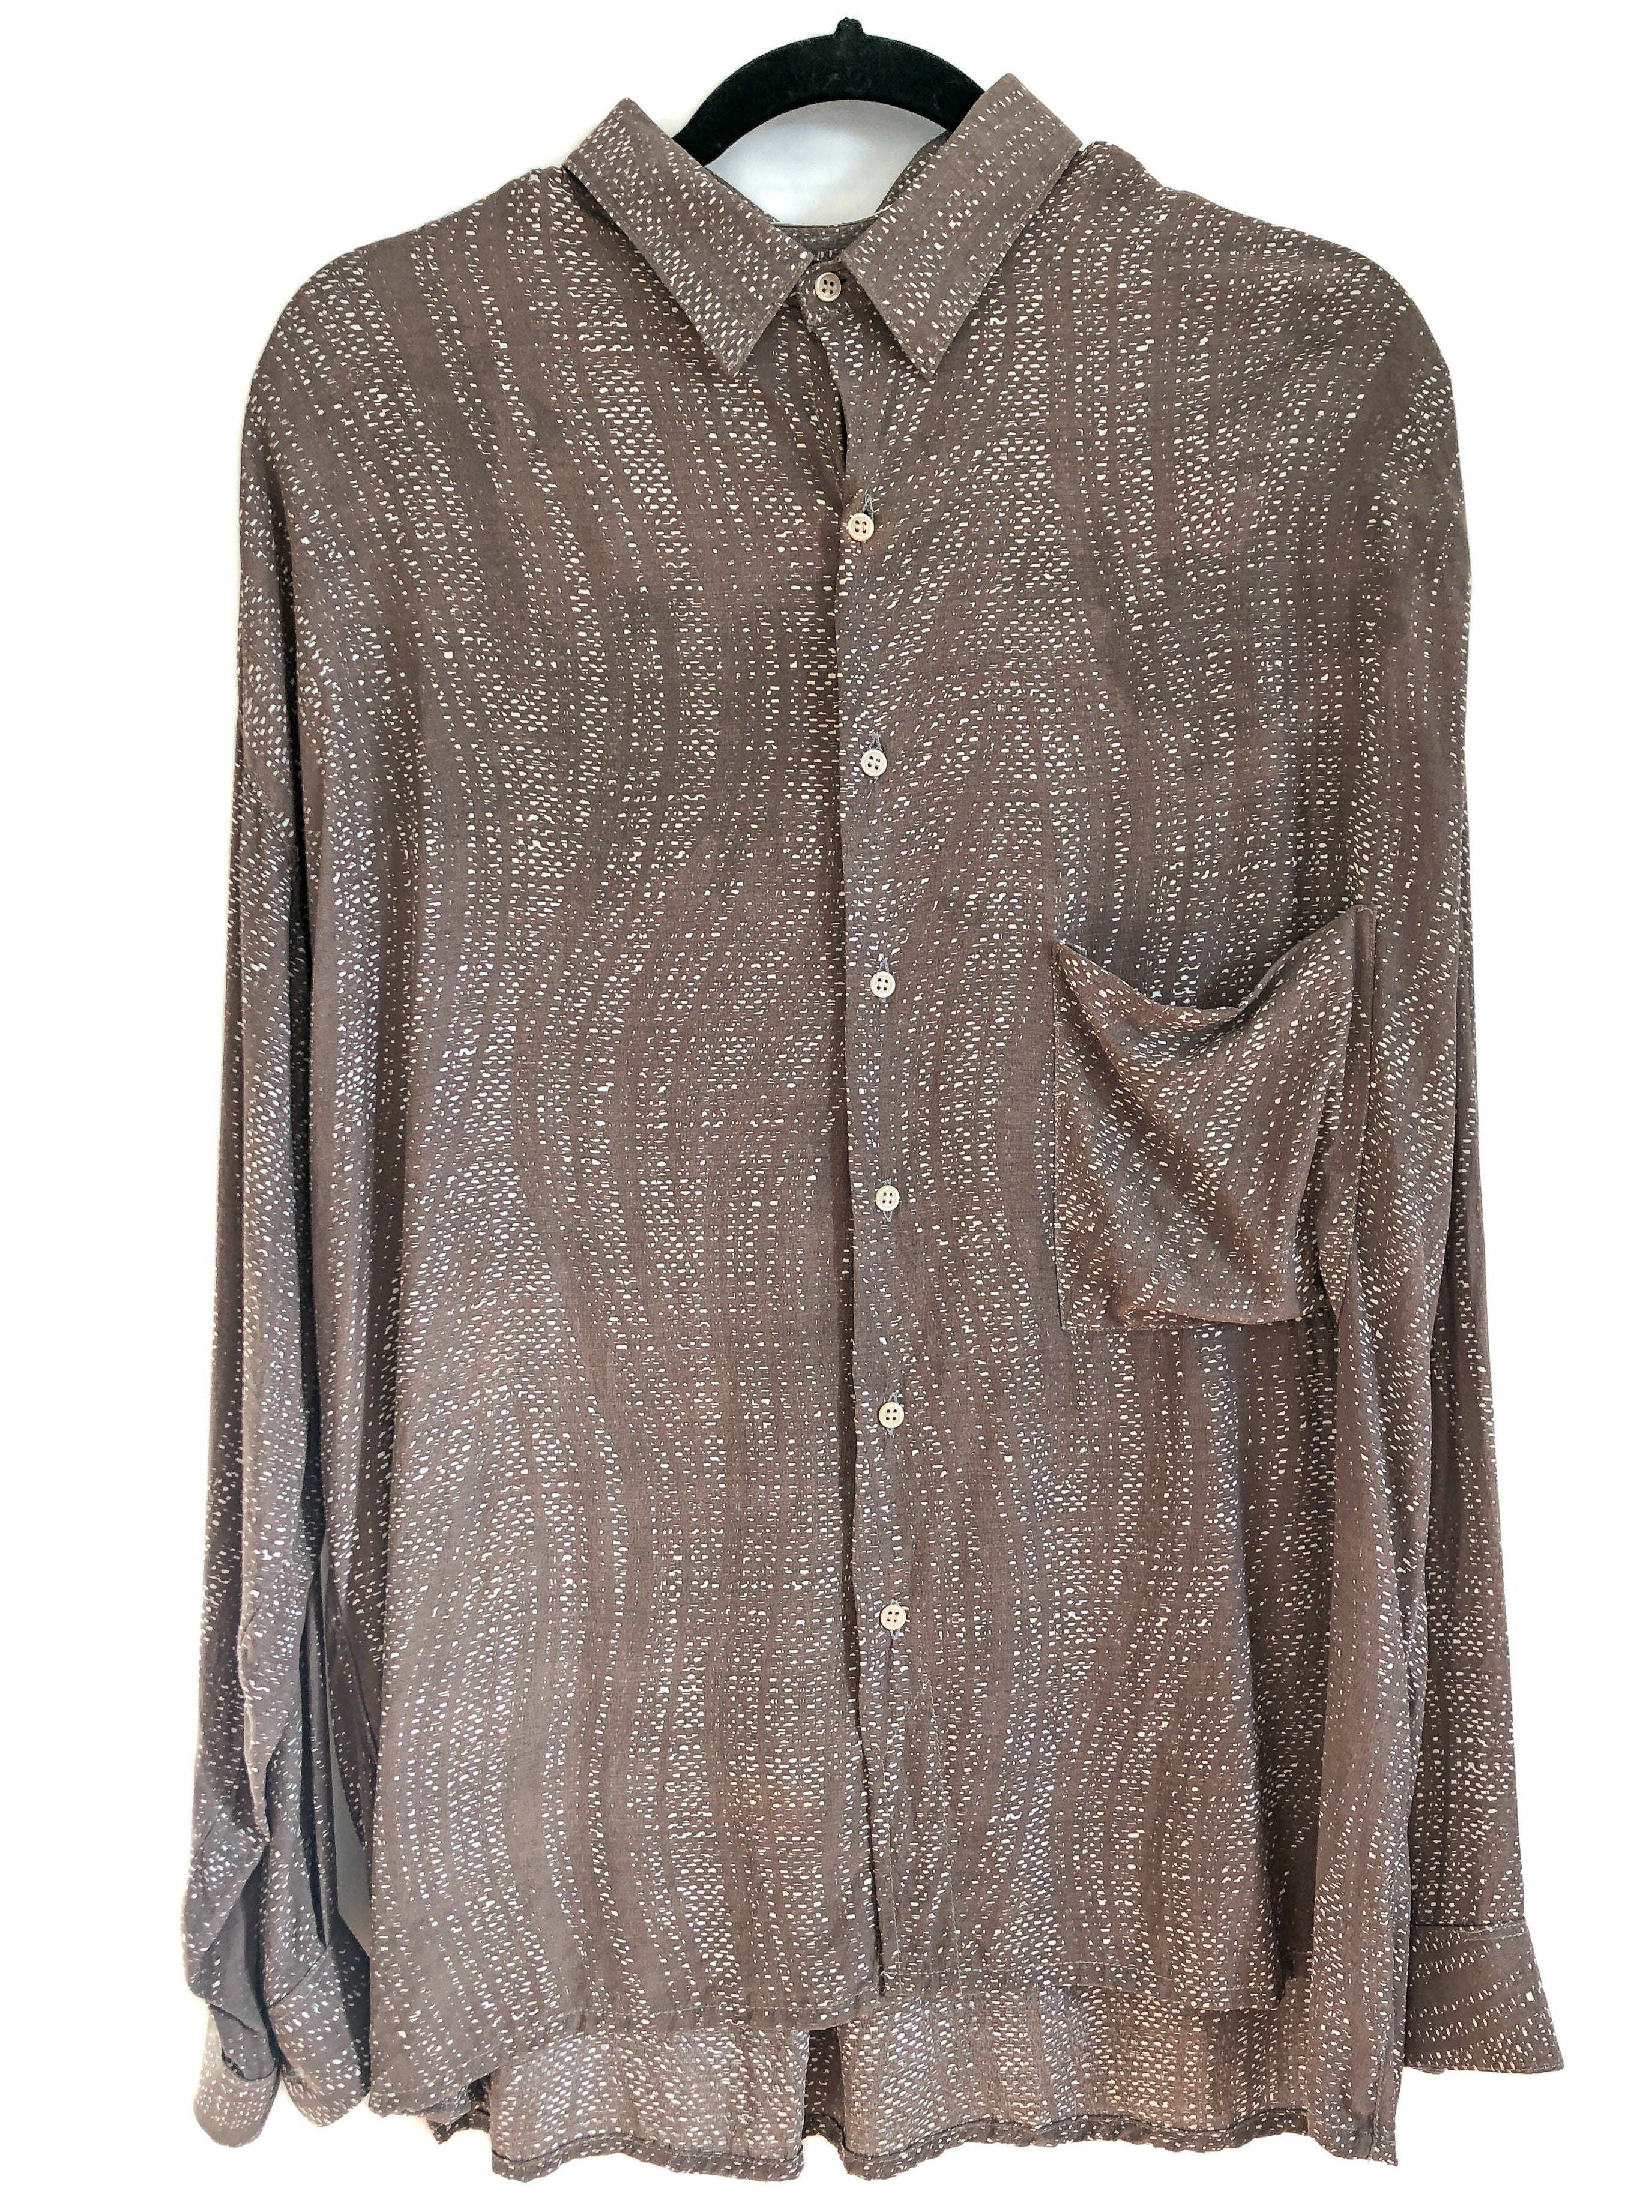 Unisex Silk Wavy Print Oxford Shirt, Abstract Brown Button Up 1980s Vintage Faux Valentino